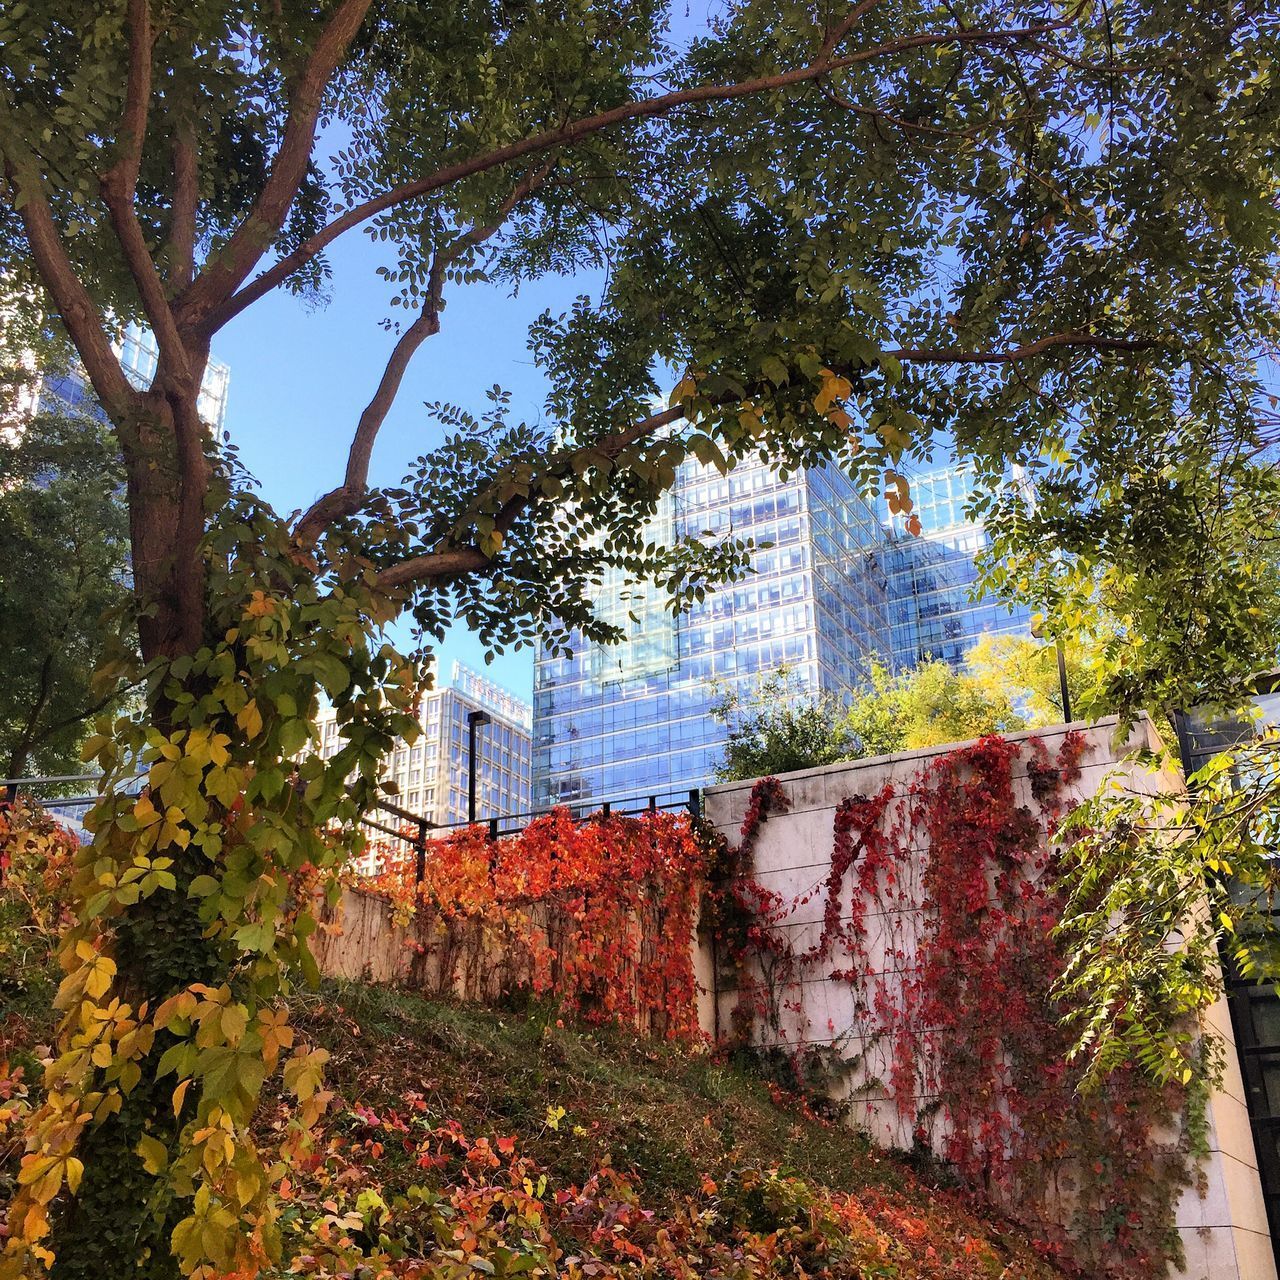 LOW ANGLE VIEW OF TREES AND BUILDINGS AGAINST SKY